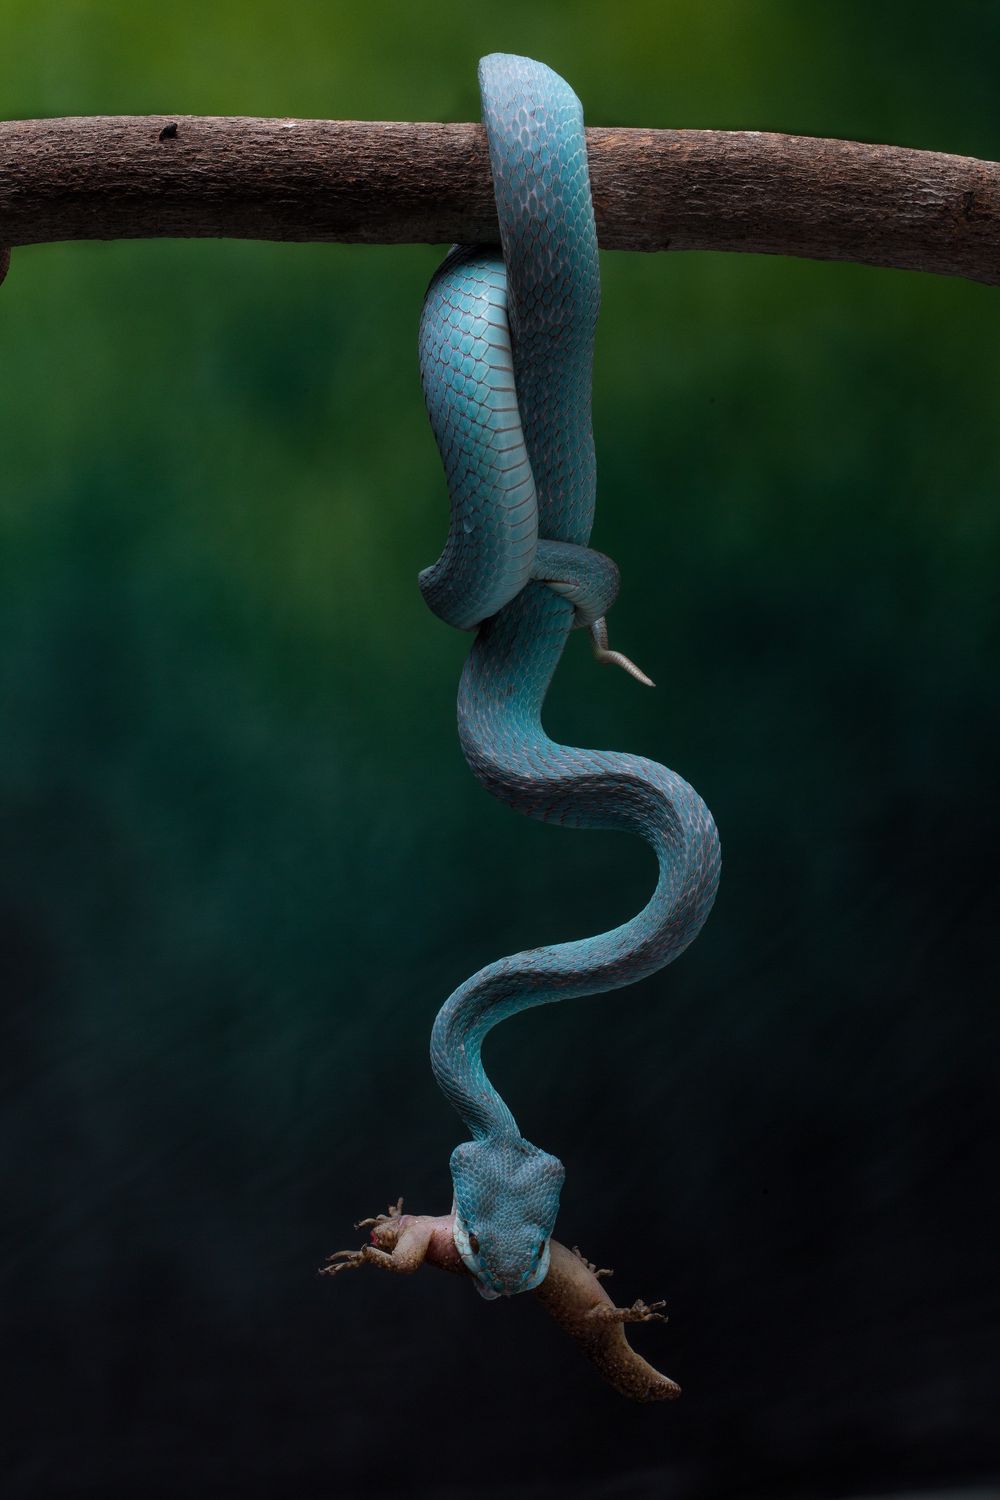 Beware the impossibly fascinating blue viper. This really is a ‘look but don’t touch’ situation, because as visually beautiful as that blue viper is, it’s not the kind of creature you want to mess with.